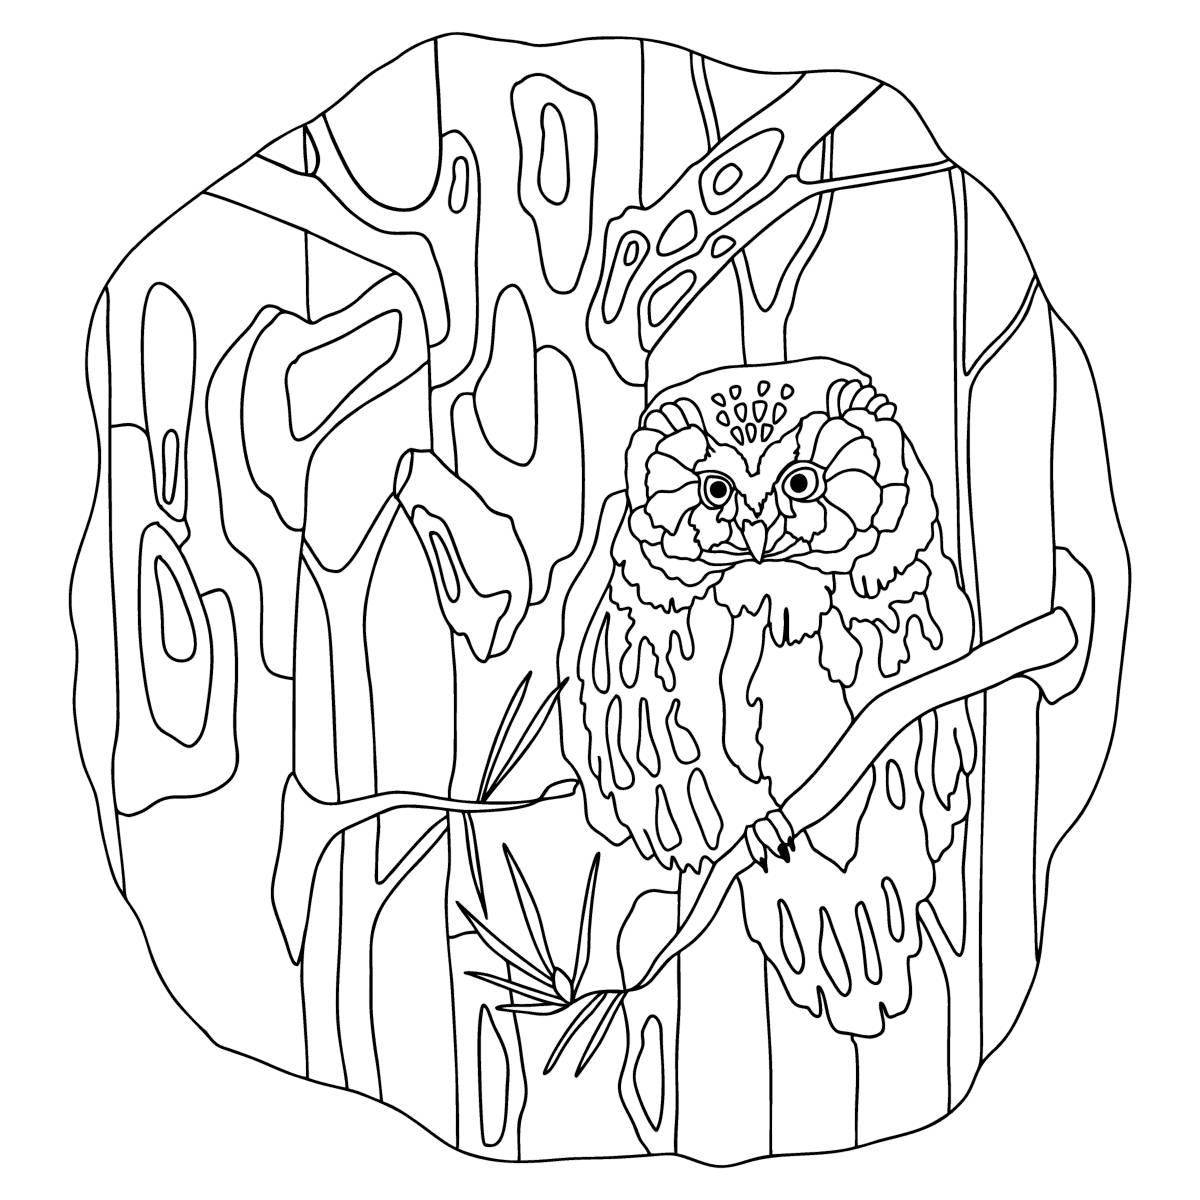 Coloring the owl skillfully by numbers